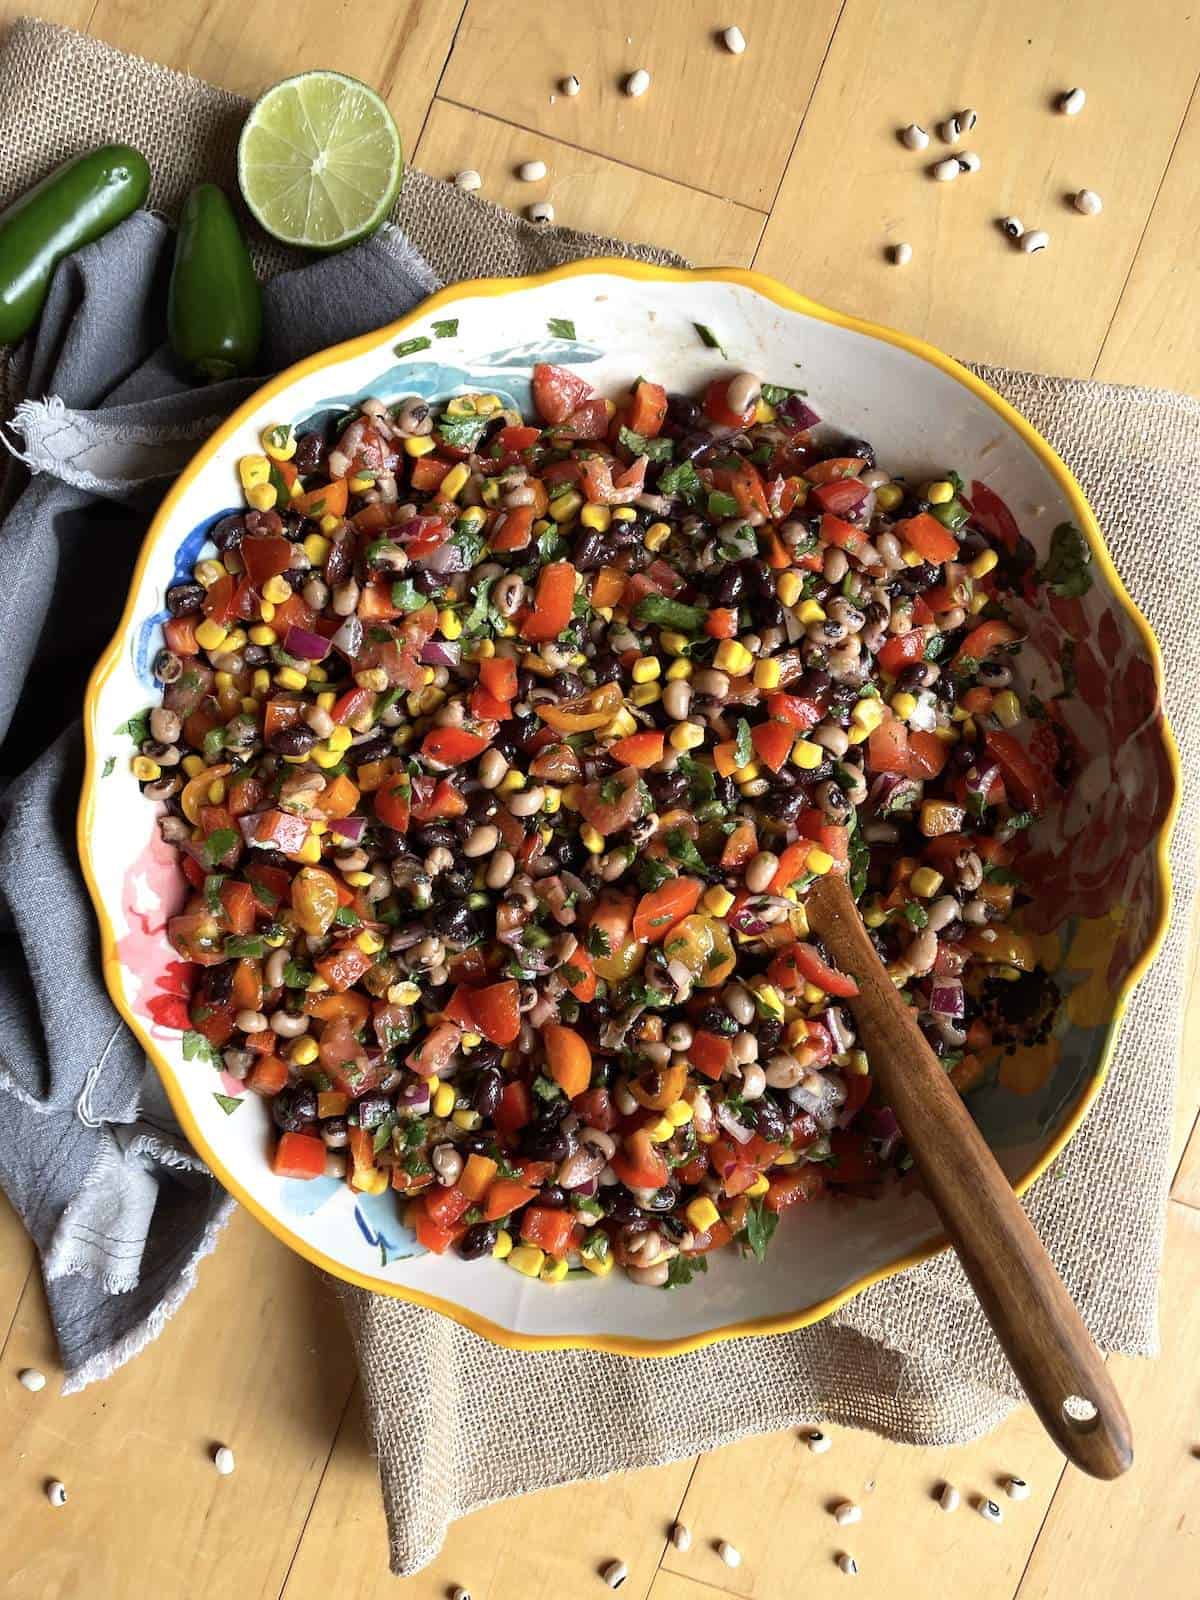 A yellow bowl of redneck caviar with black-eyed peas, black beans, corn, tomatoes, cilantro, peppers, and a vinegar dressing with a wooden spoon.